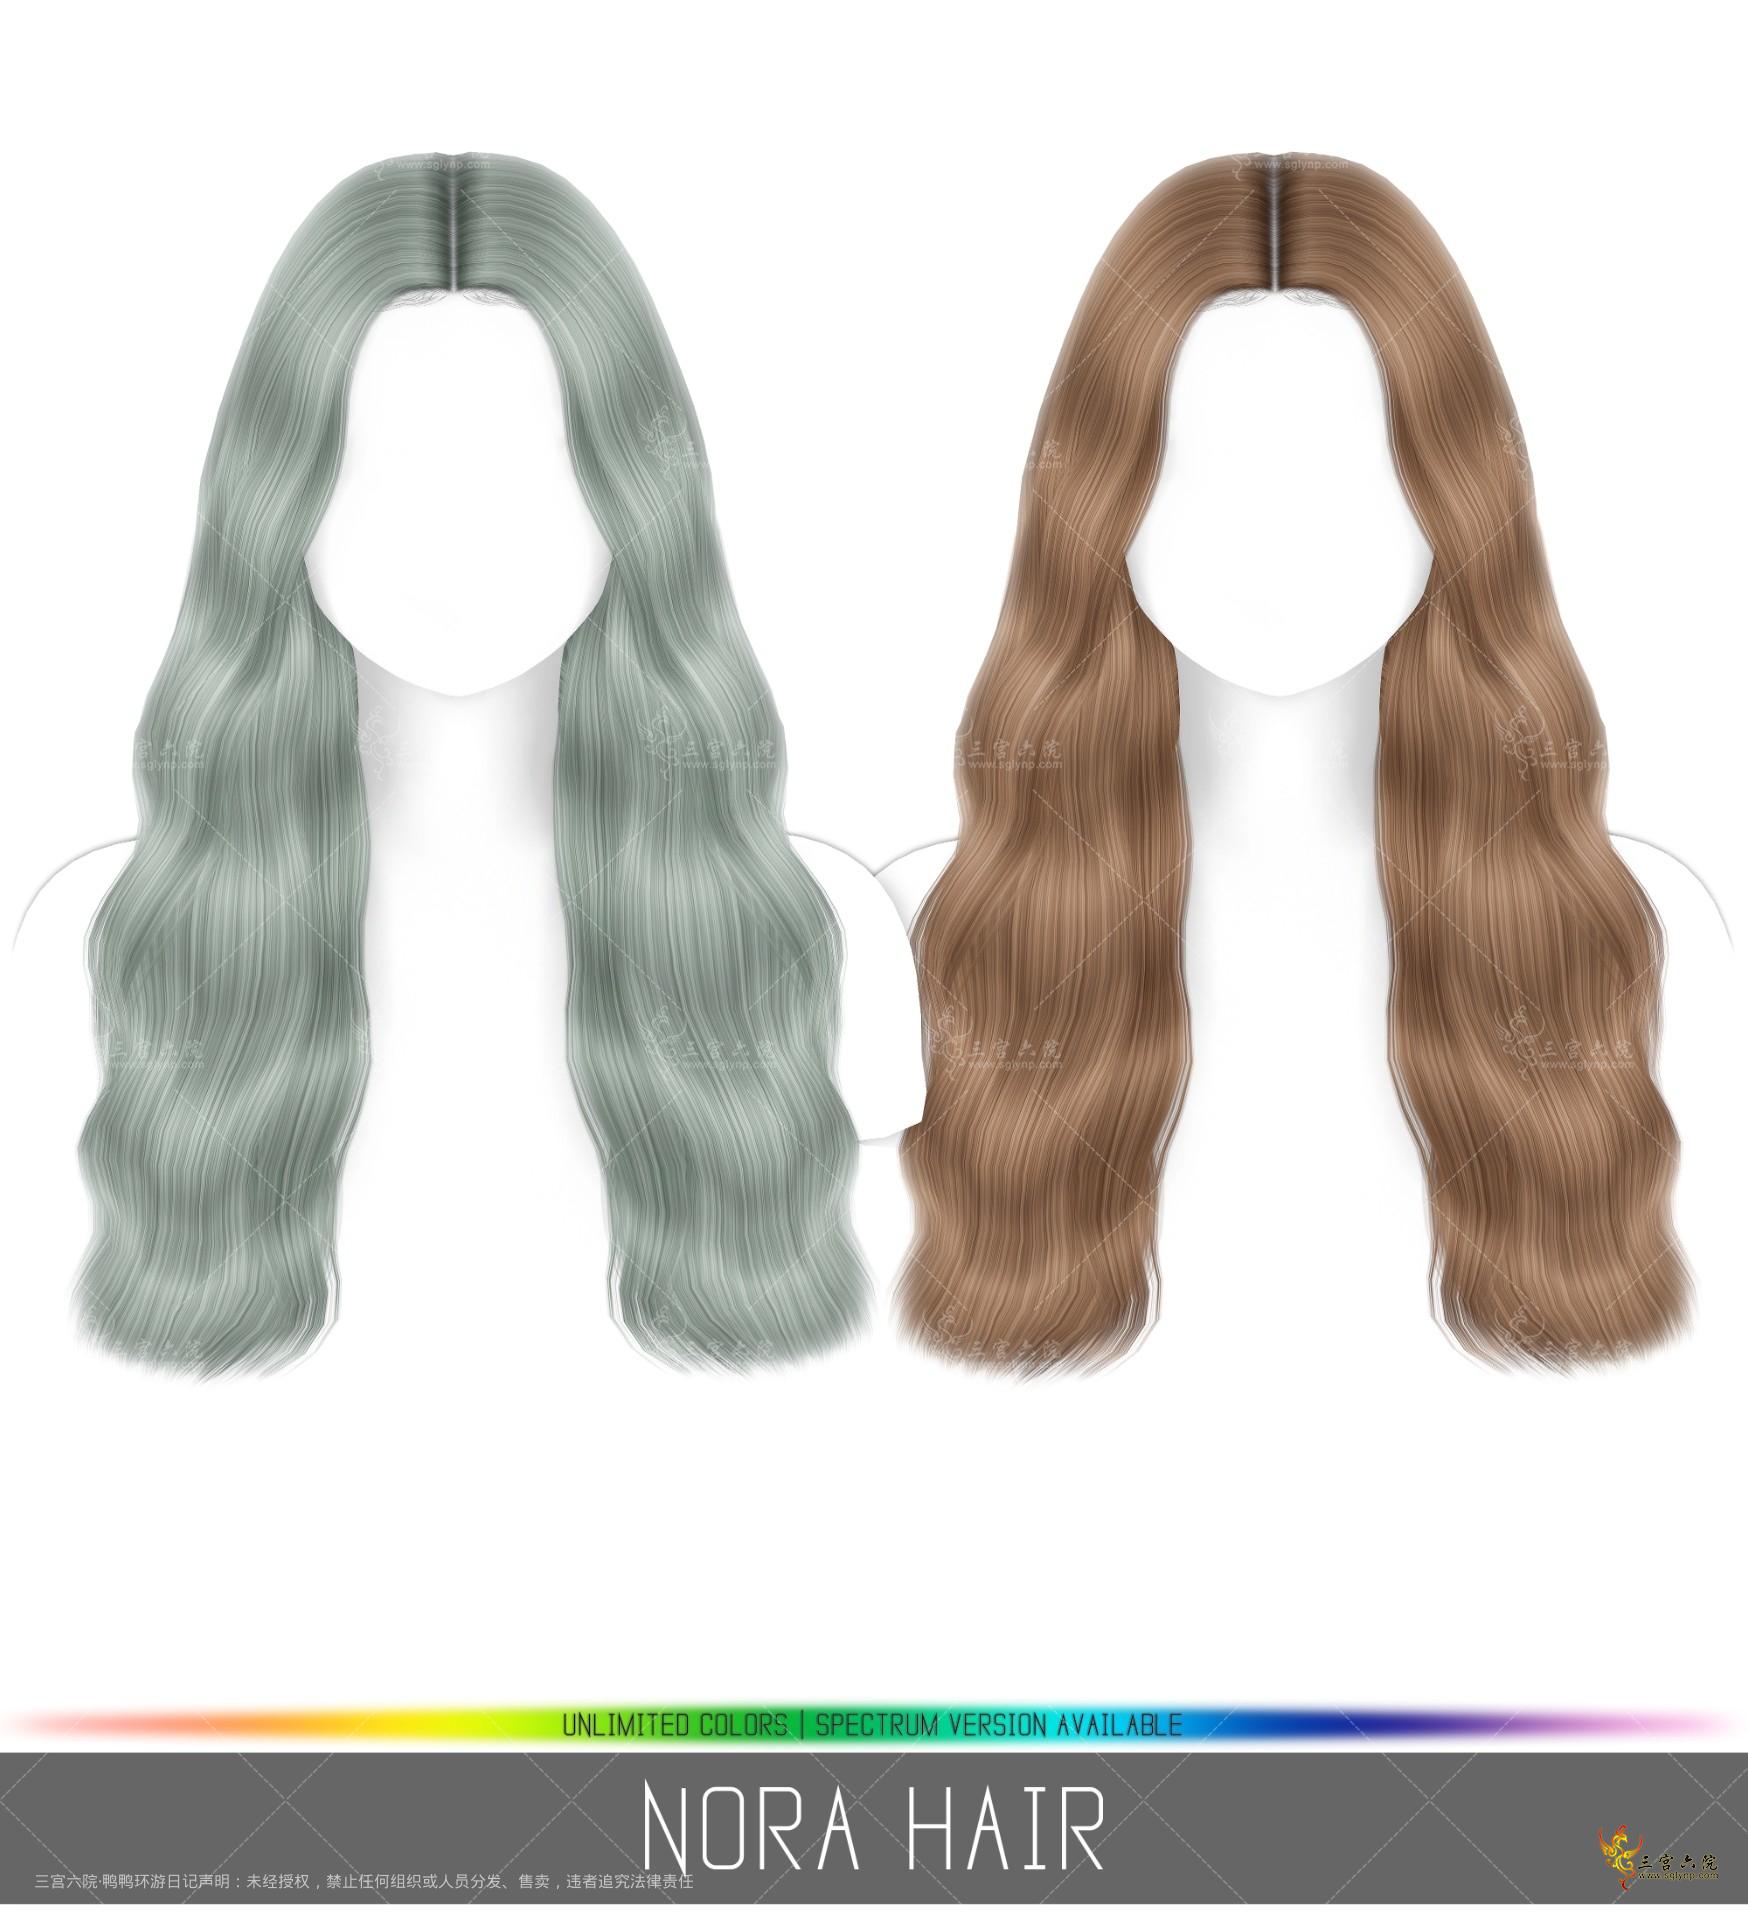 NoraHair.png